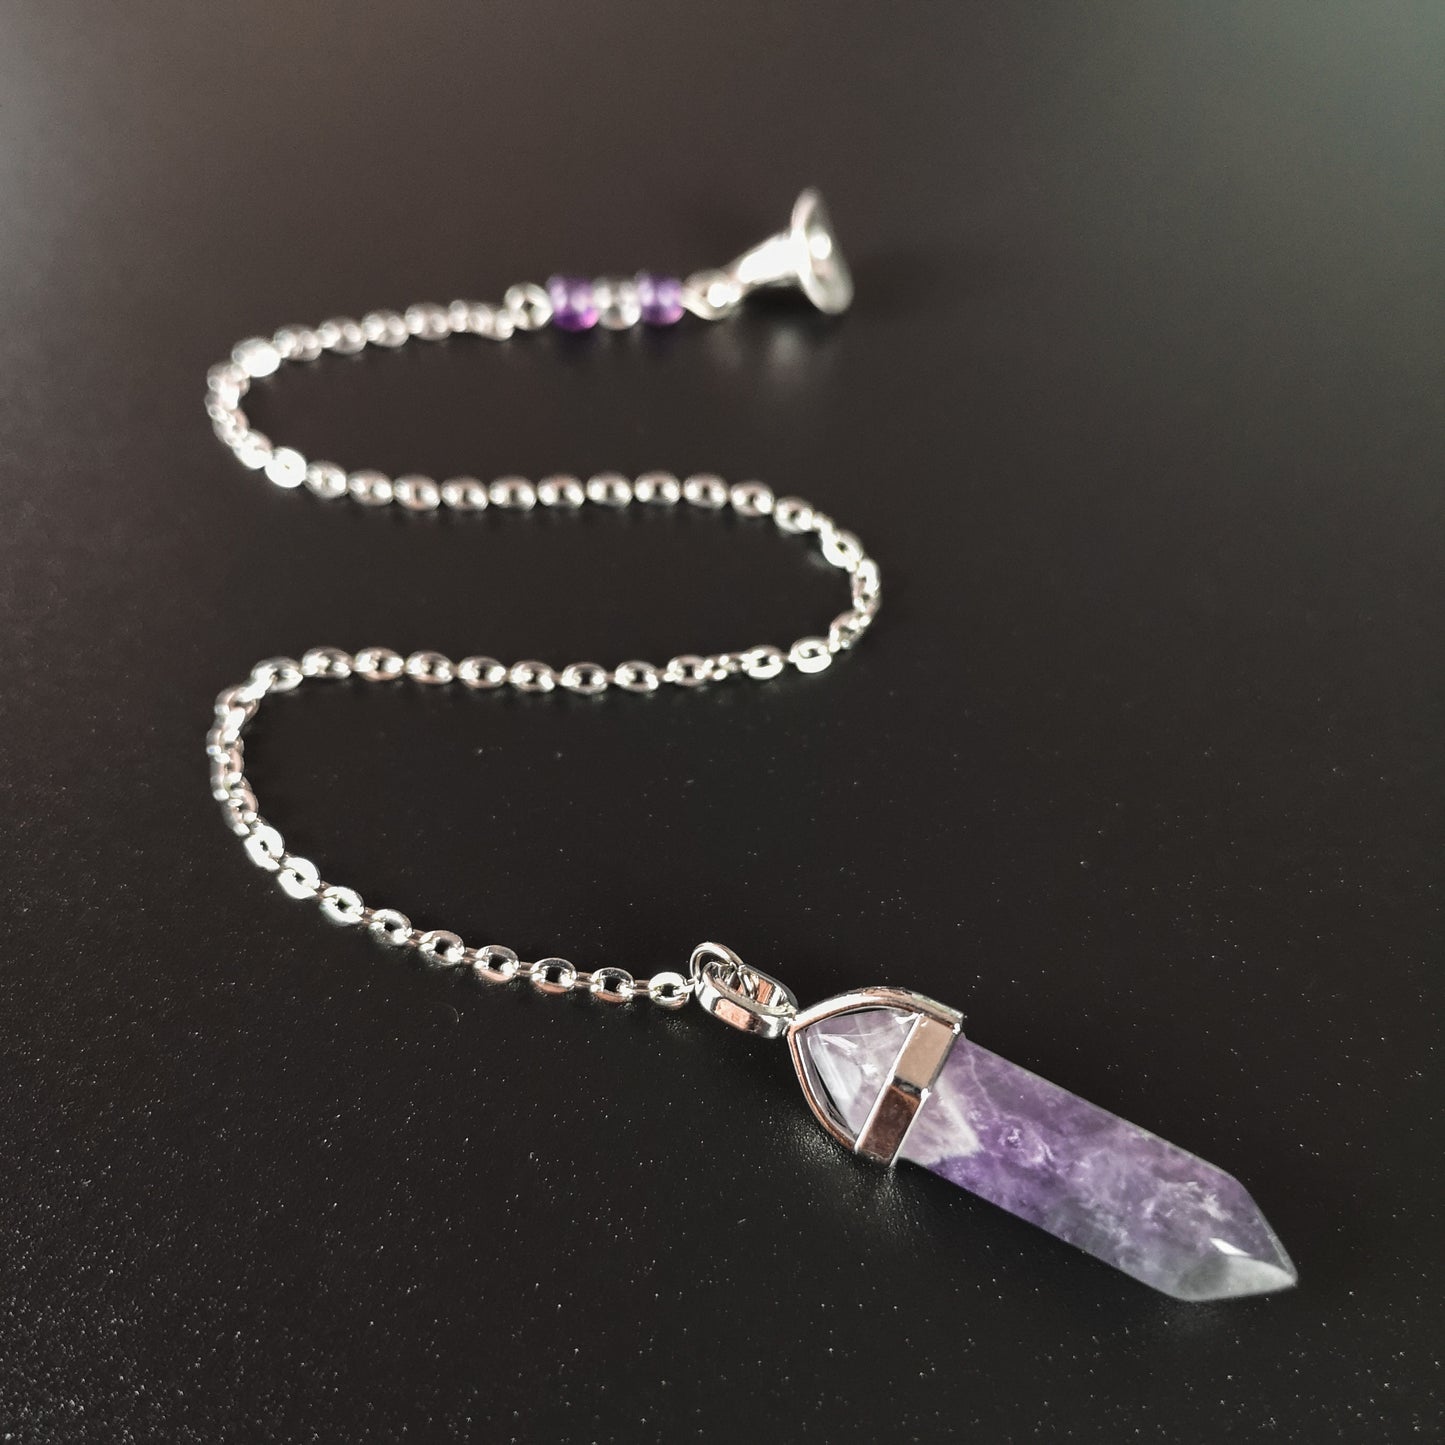 Amethyst gemstone pendulum witch hat charm witchcraft Wiccan divination tool